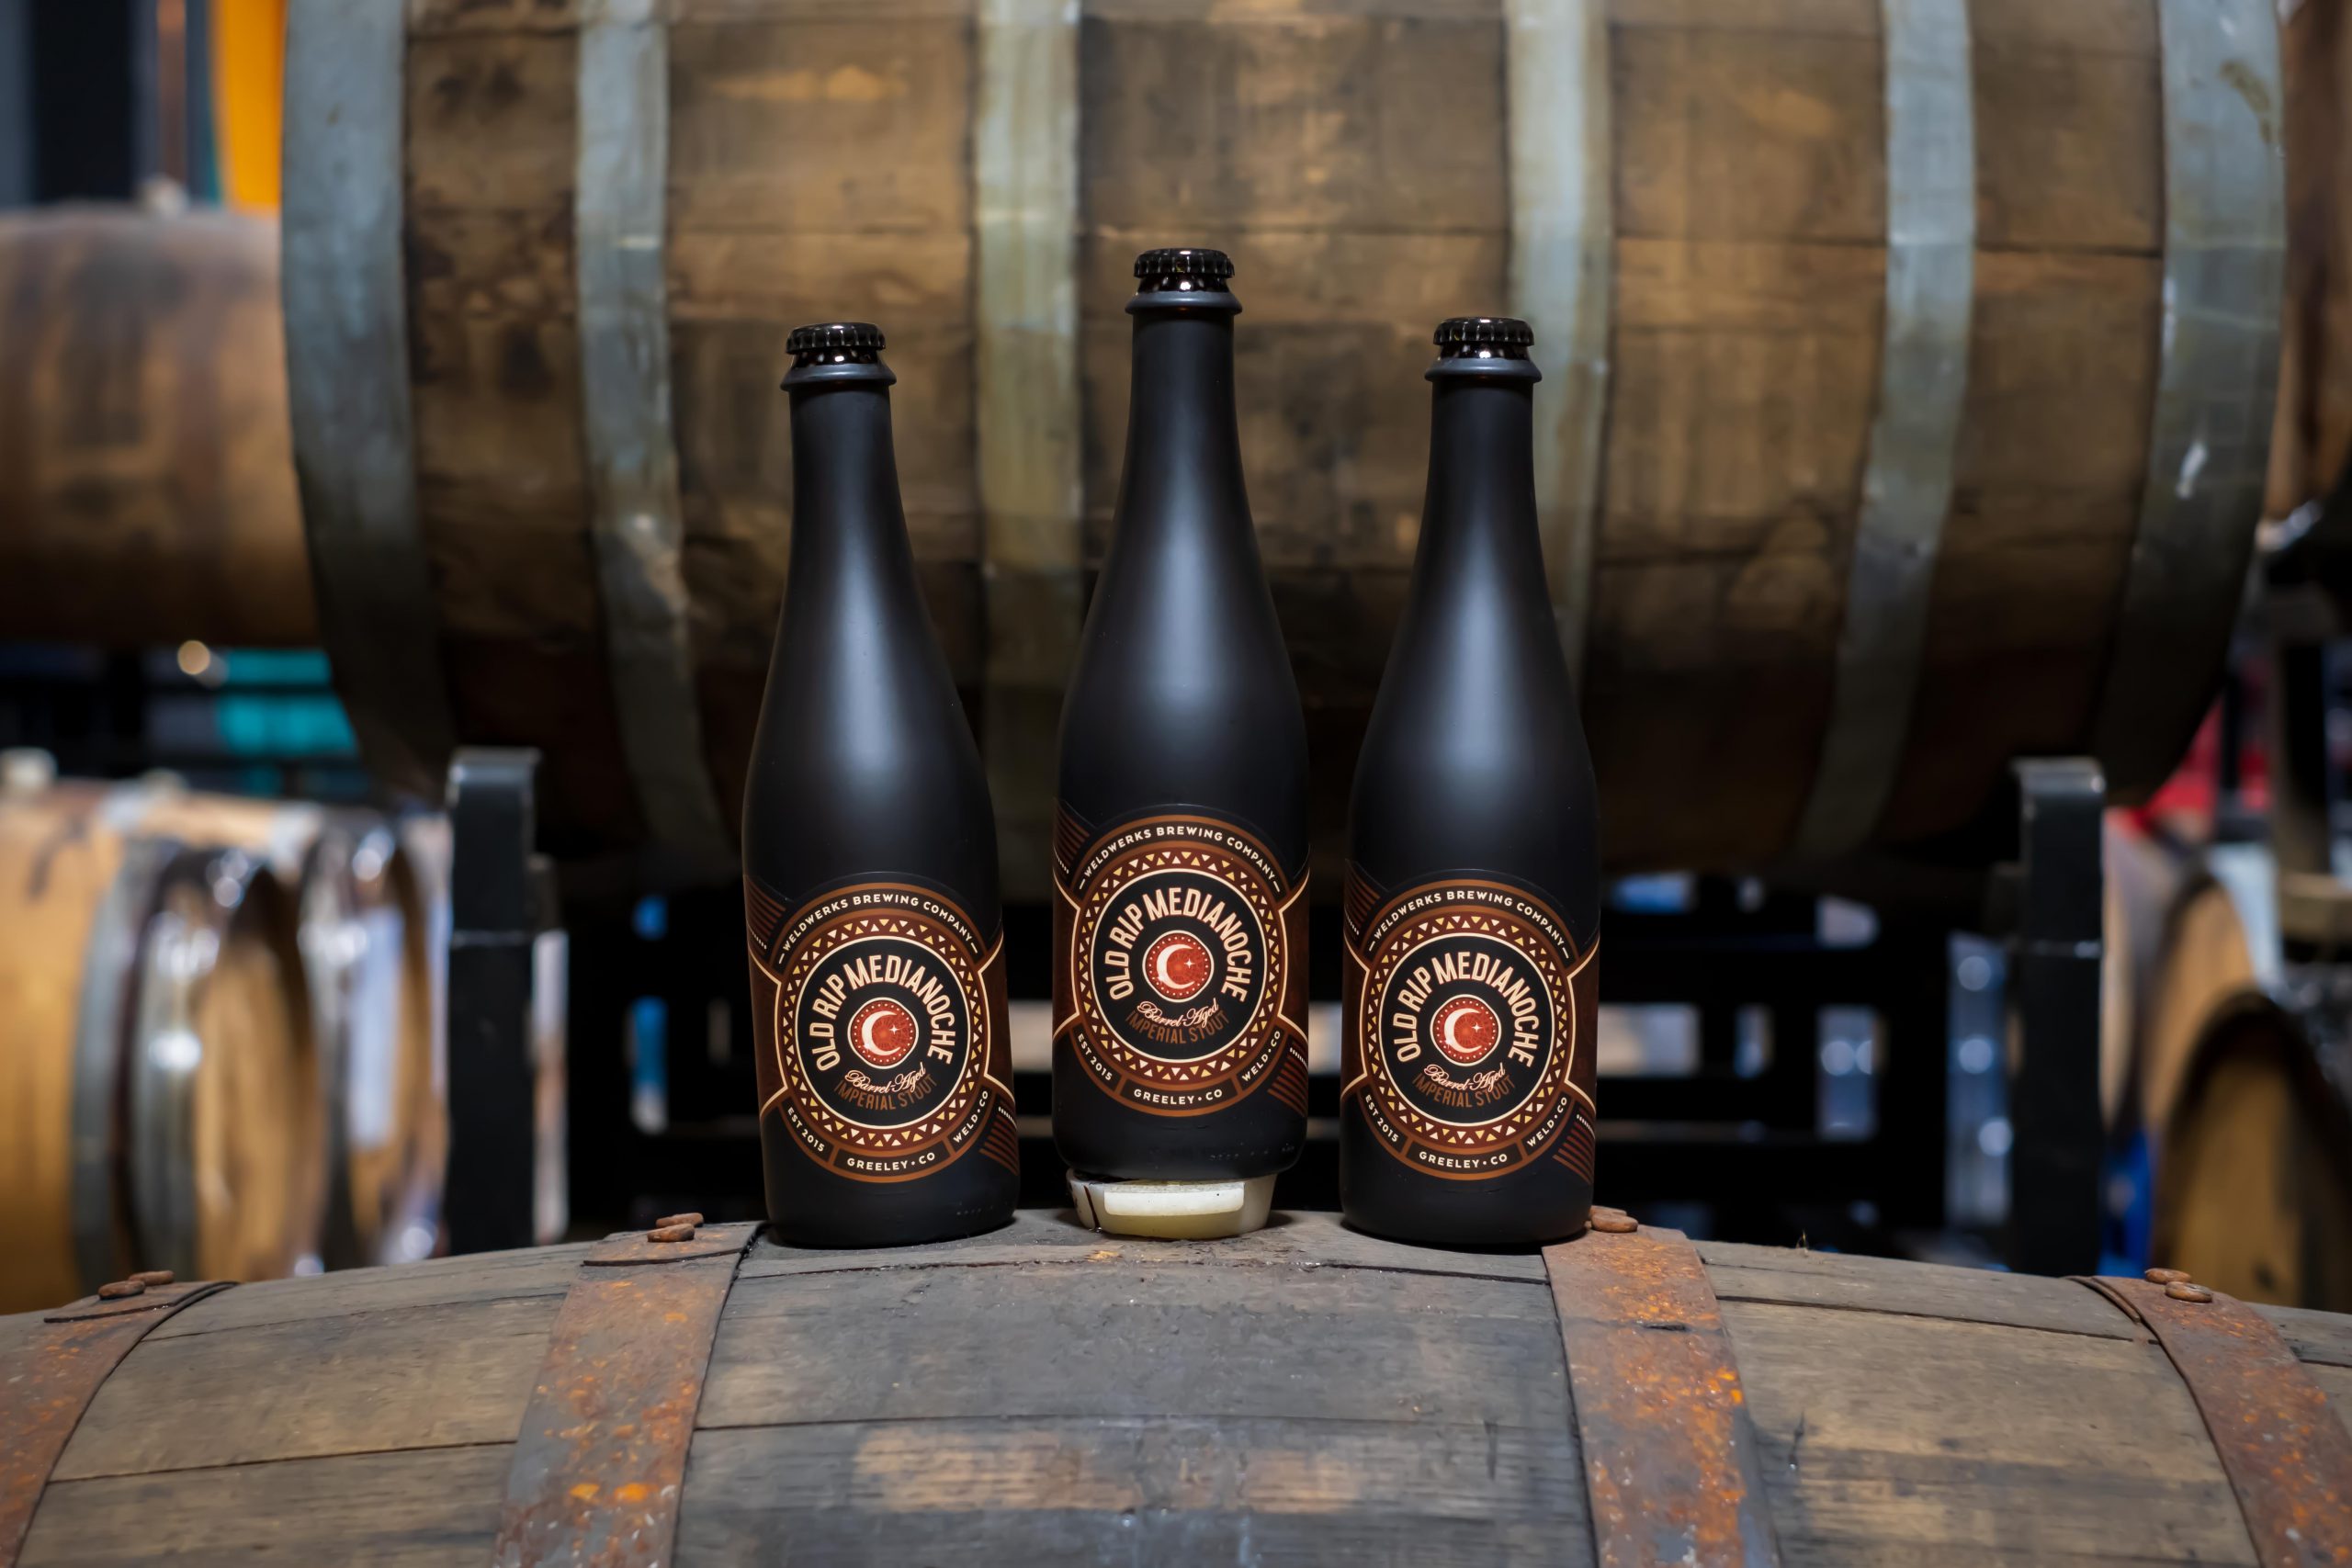  WeldWerks Brewing Co. Announces Distribution of Old Rip Medianoche Beyond Colorado 